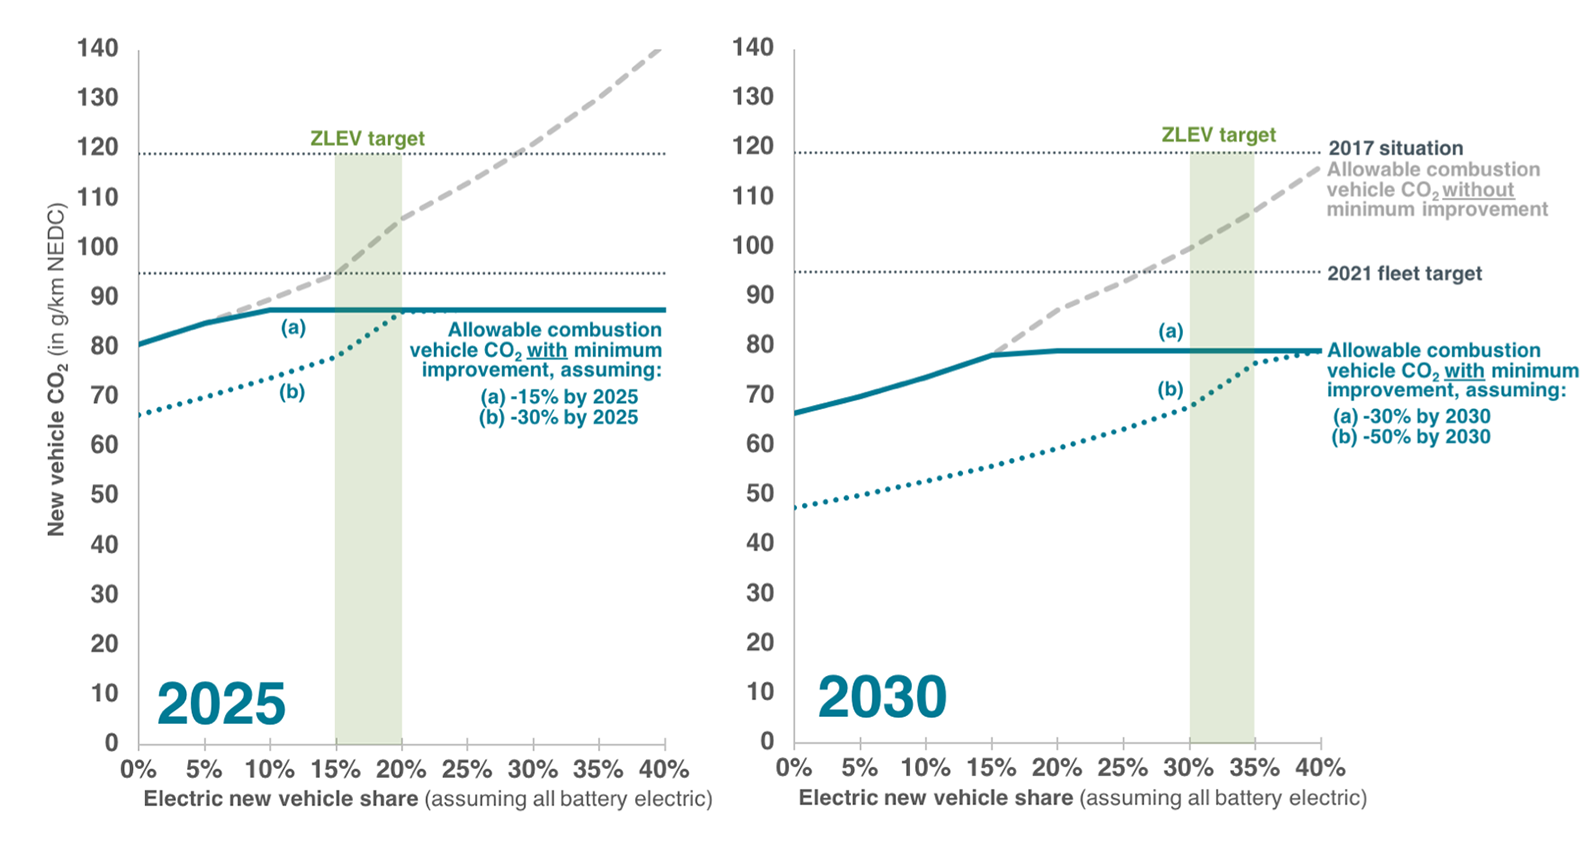 Electric vehicles 2025 and 203 with CO2 standard